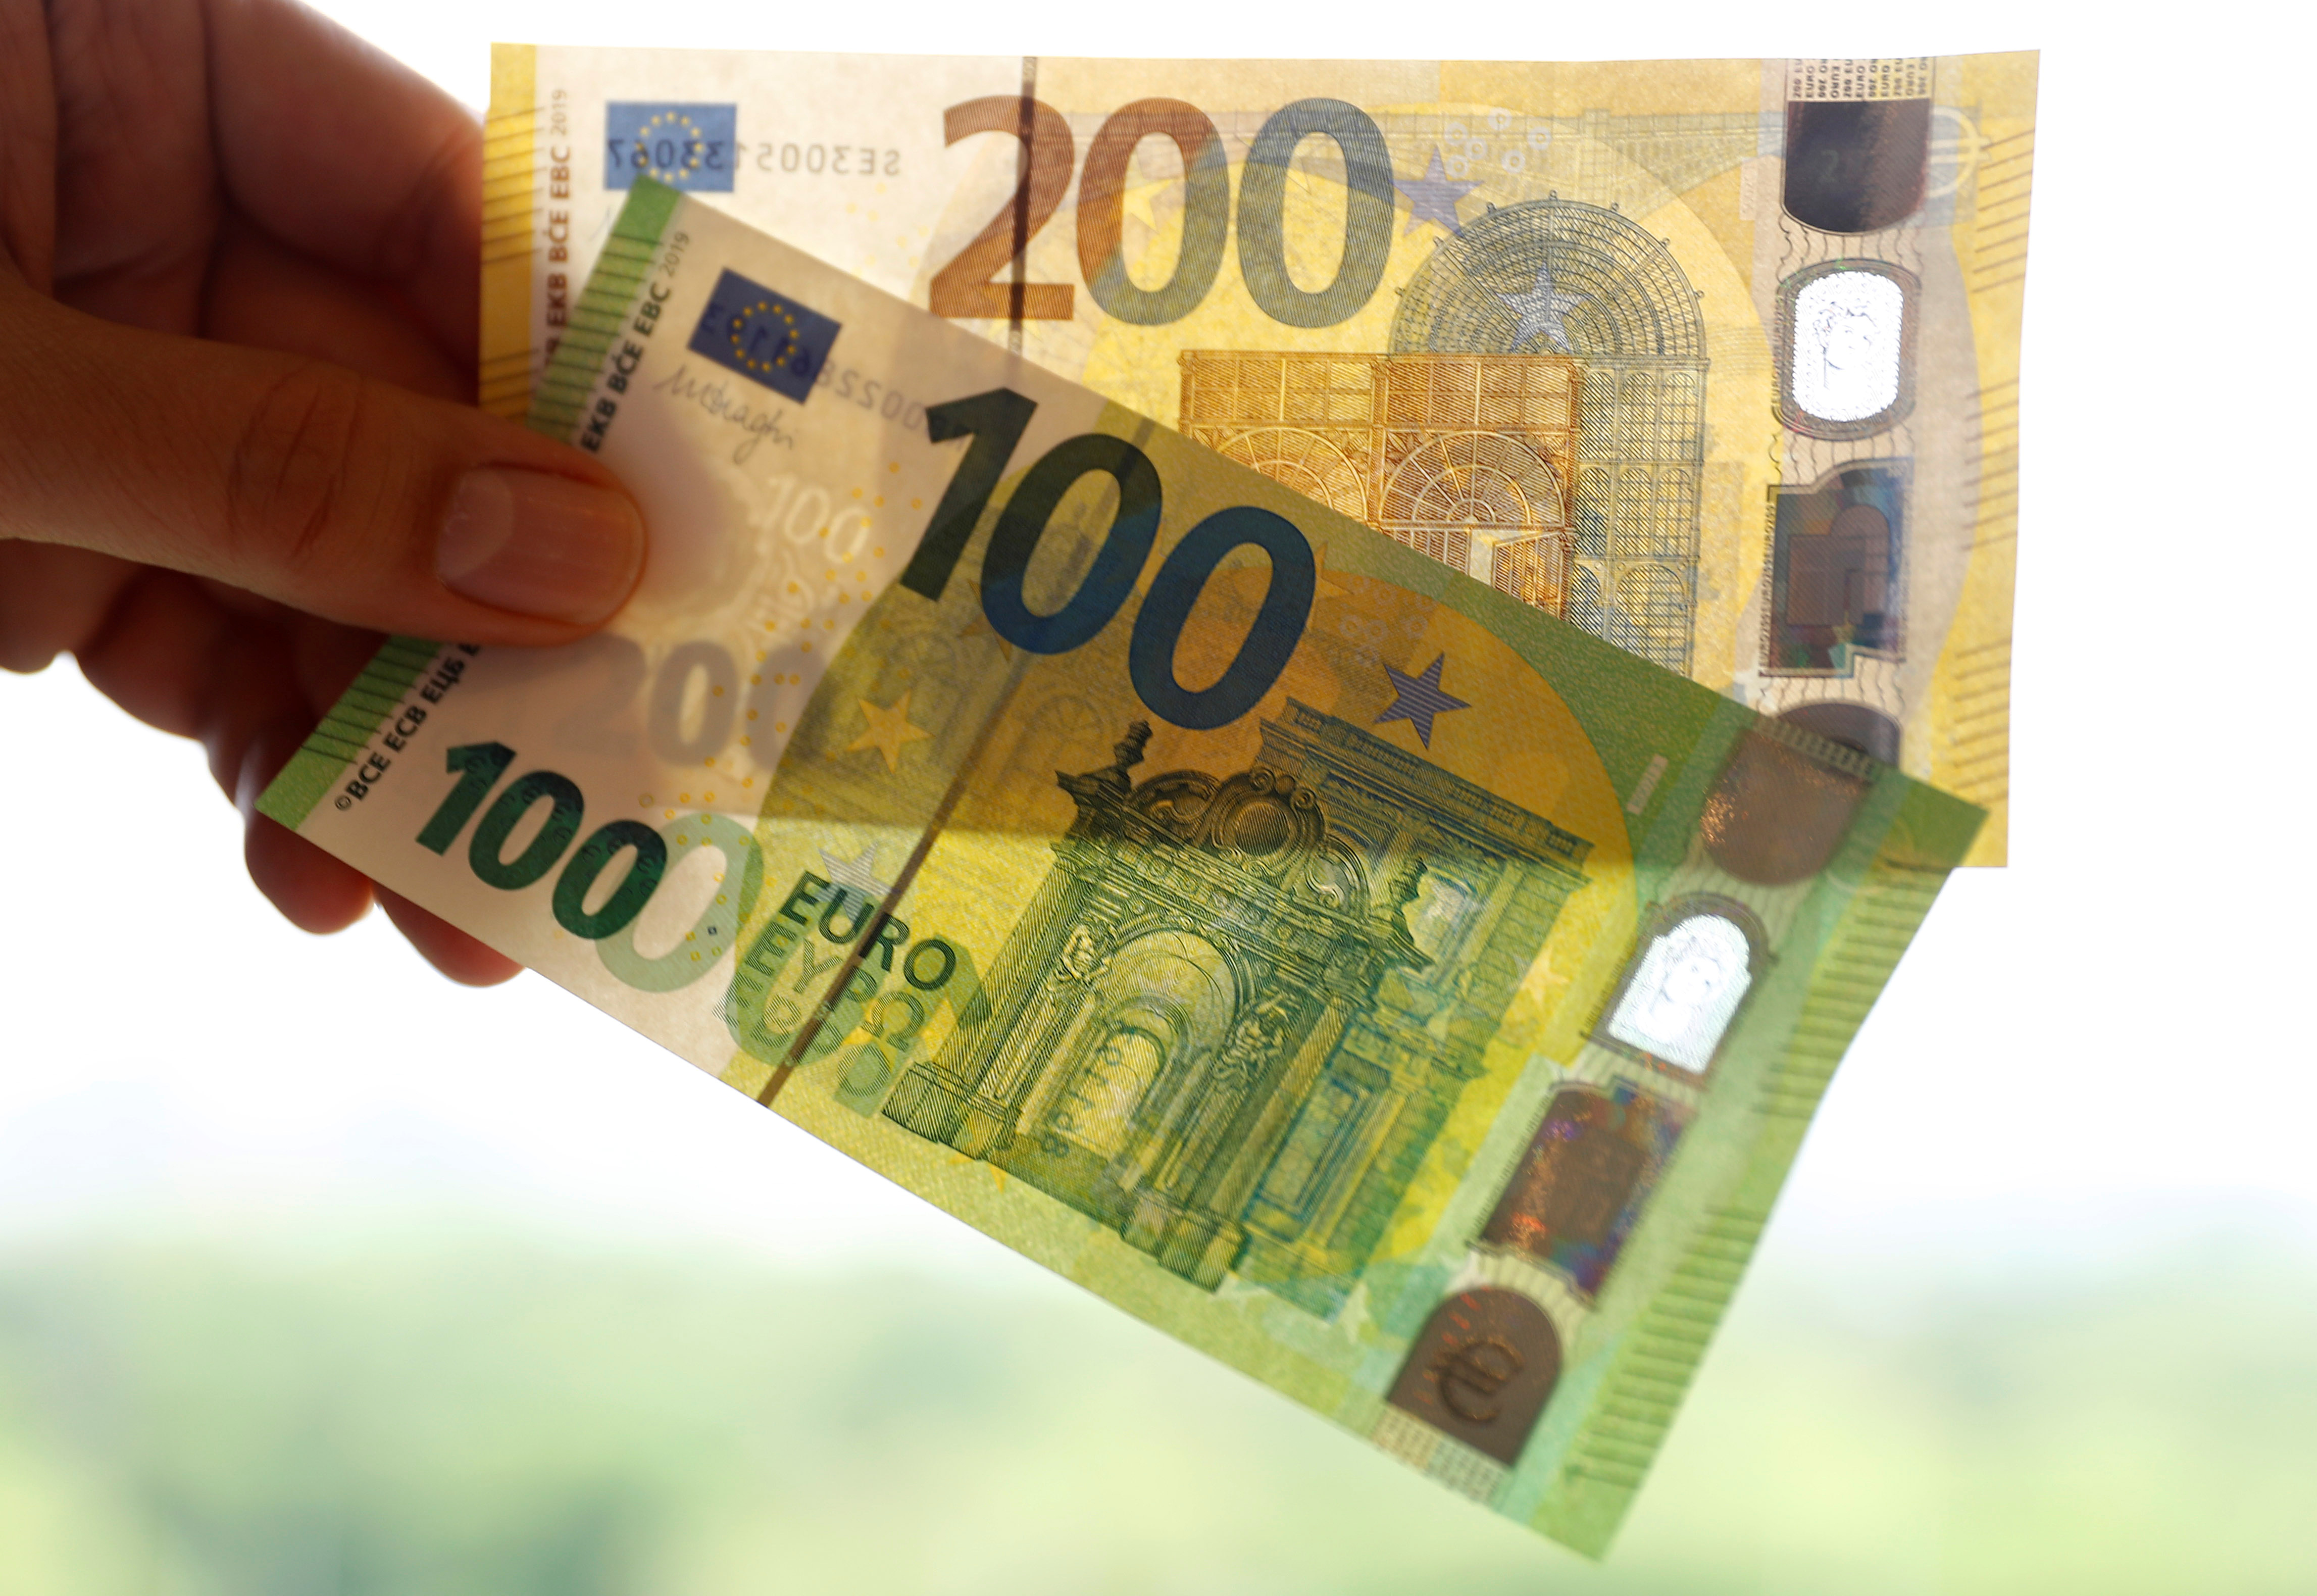 The new 100 and 200 Euro banknotes are presented at the headquarters of Germany's Federal reserve Bundesbank in Frankfurt